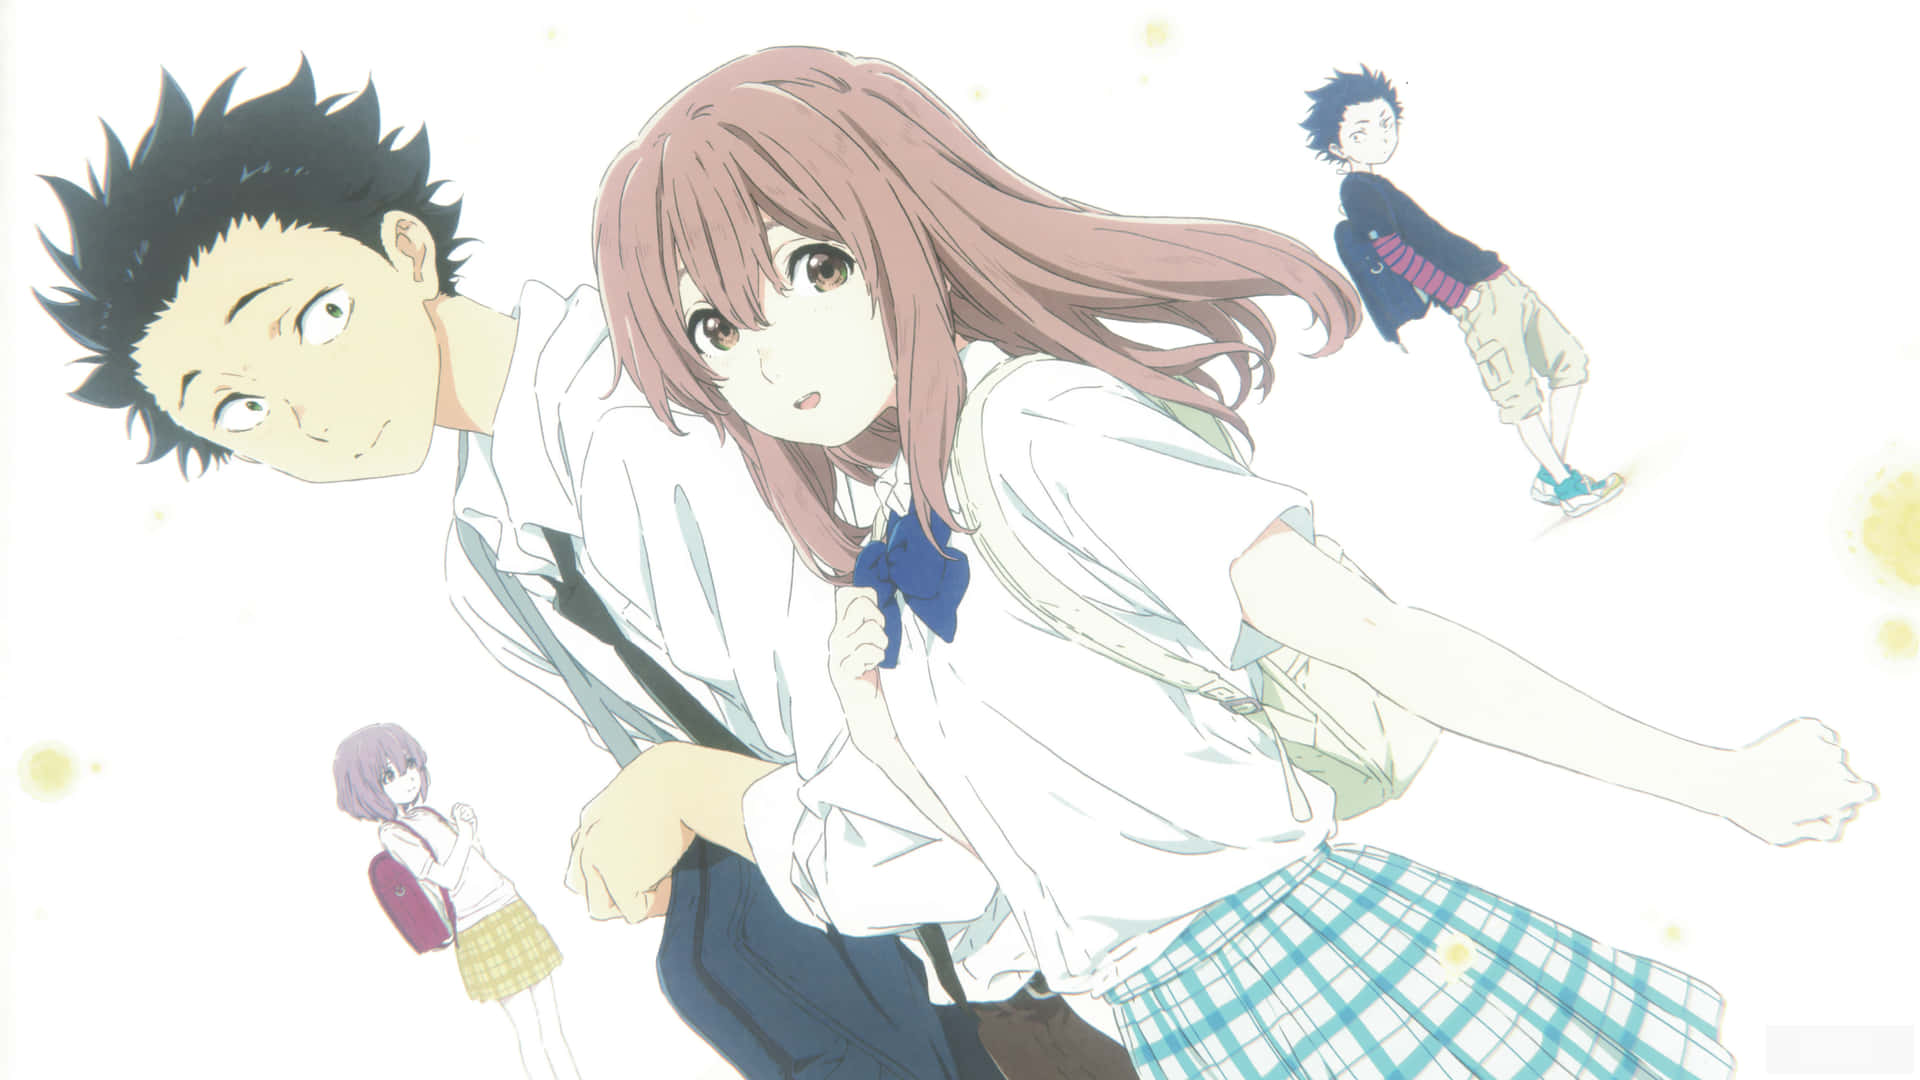 One of the most moving Anime films of recent years -- A Silent Voice